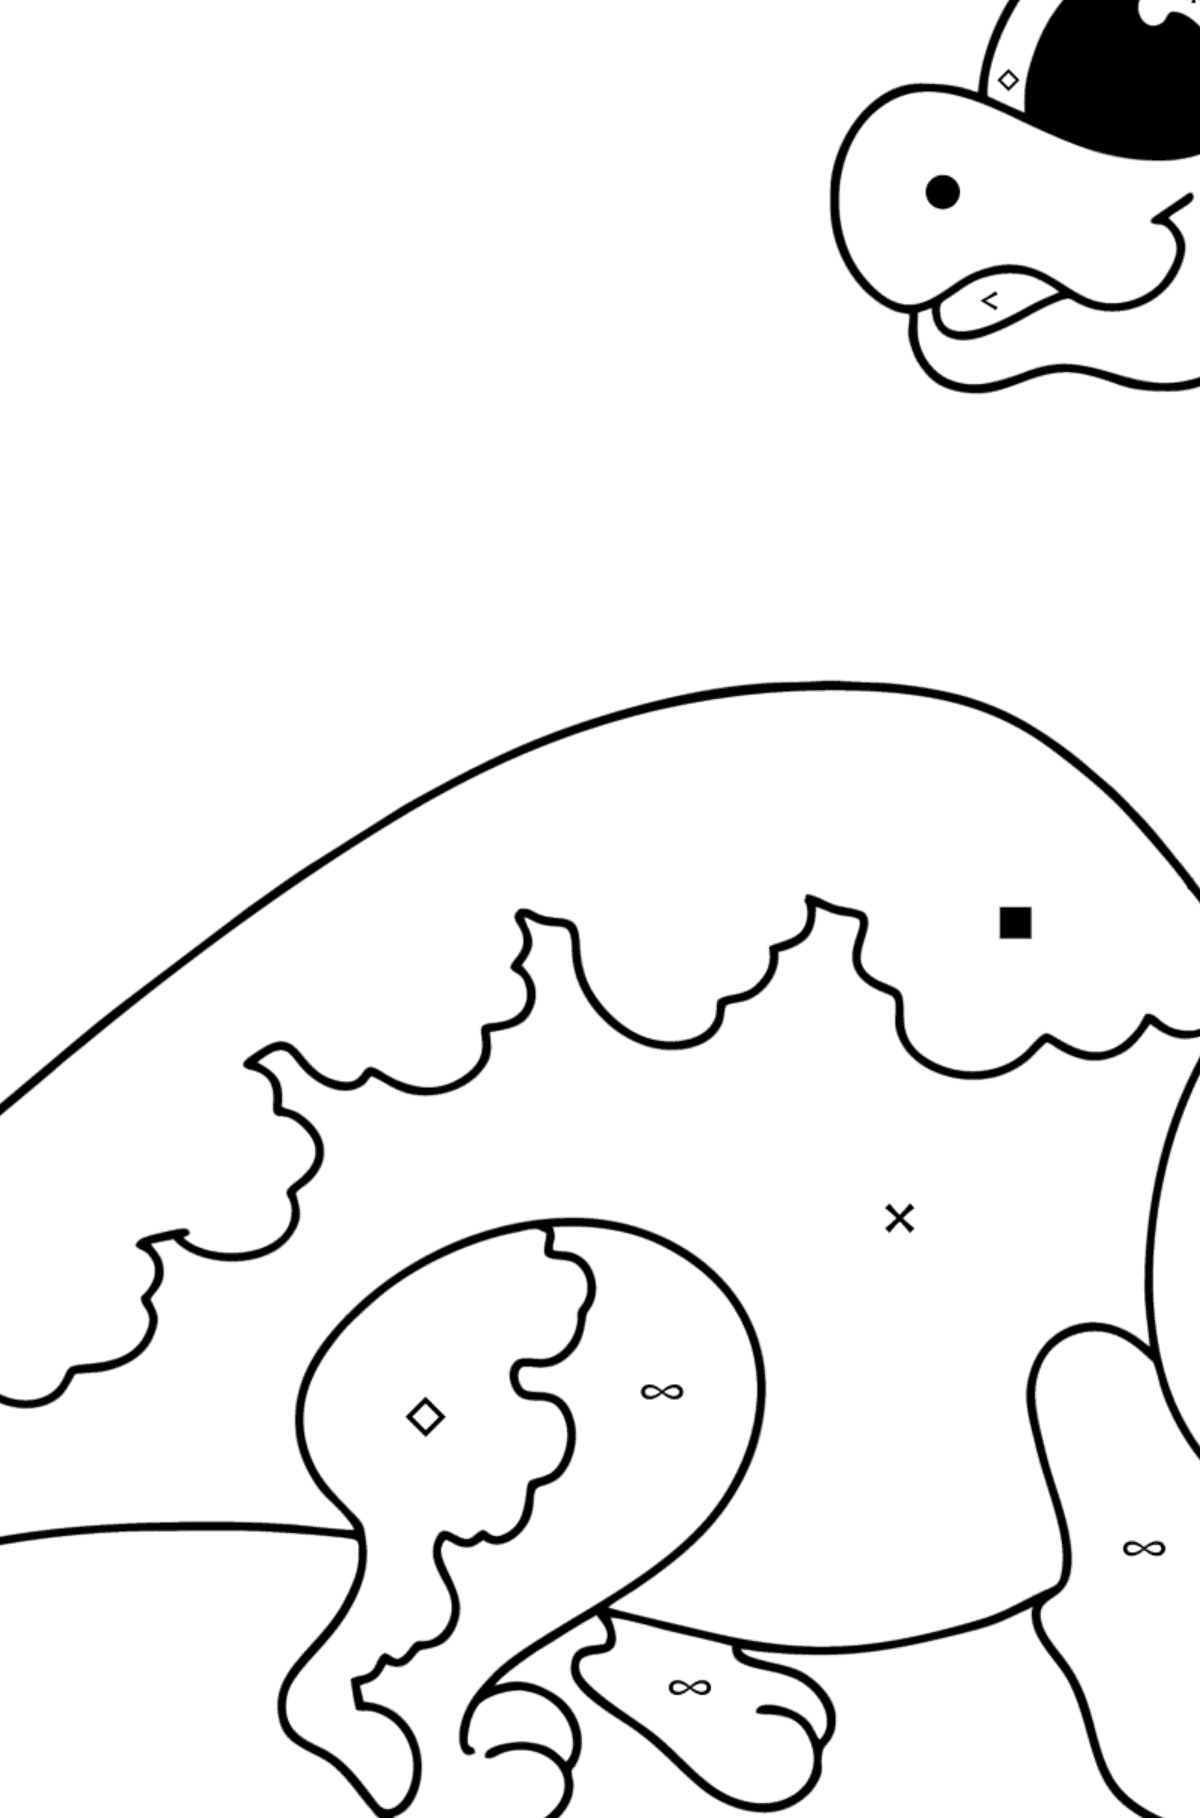 Brachiosaurus coloring page - Coloring by Symbols for Kids